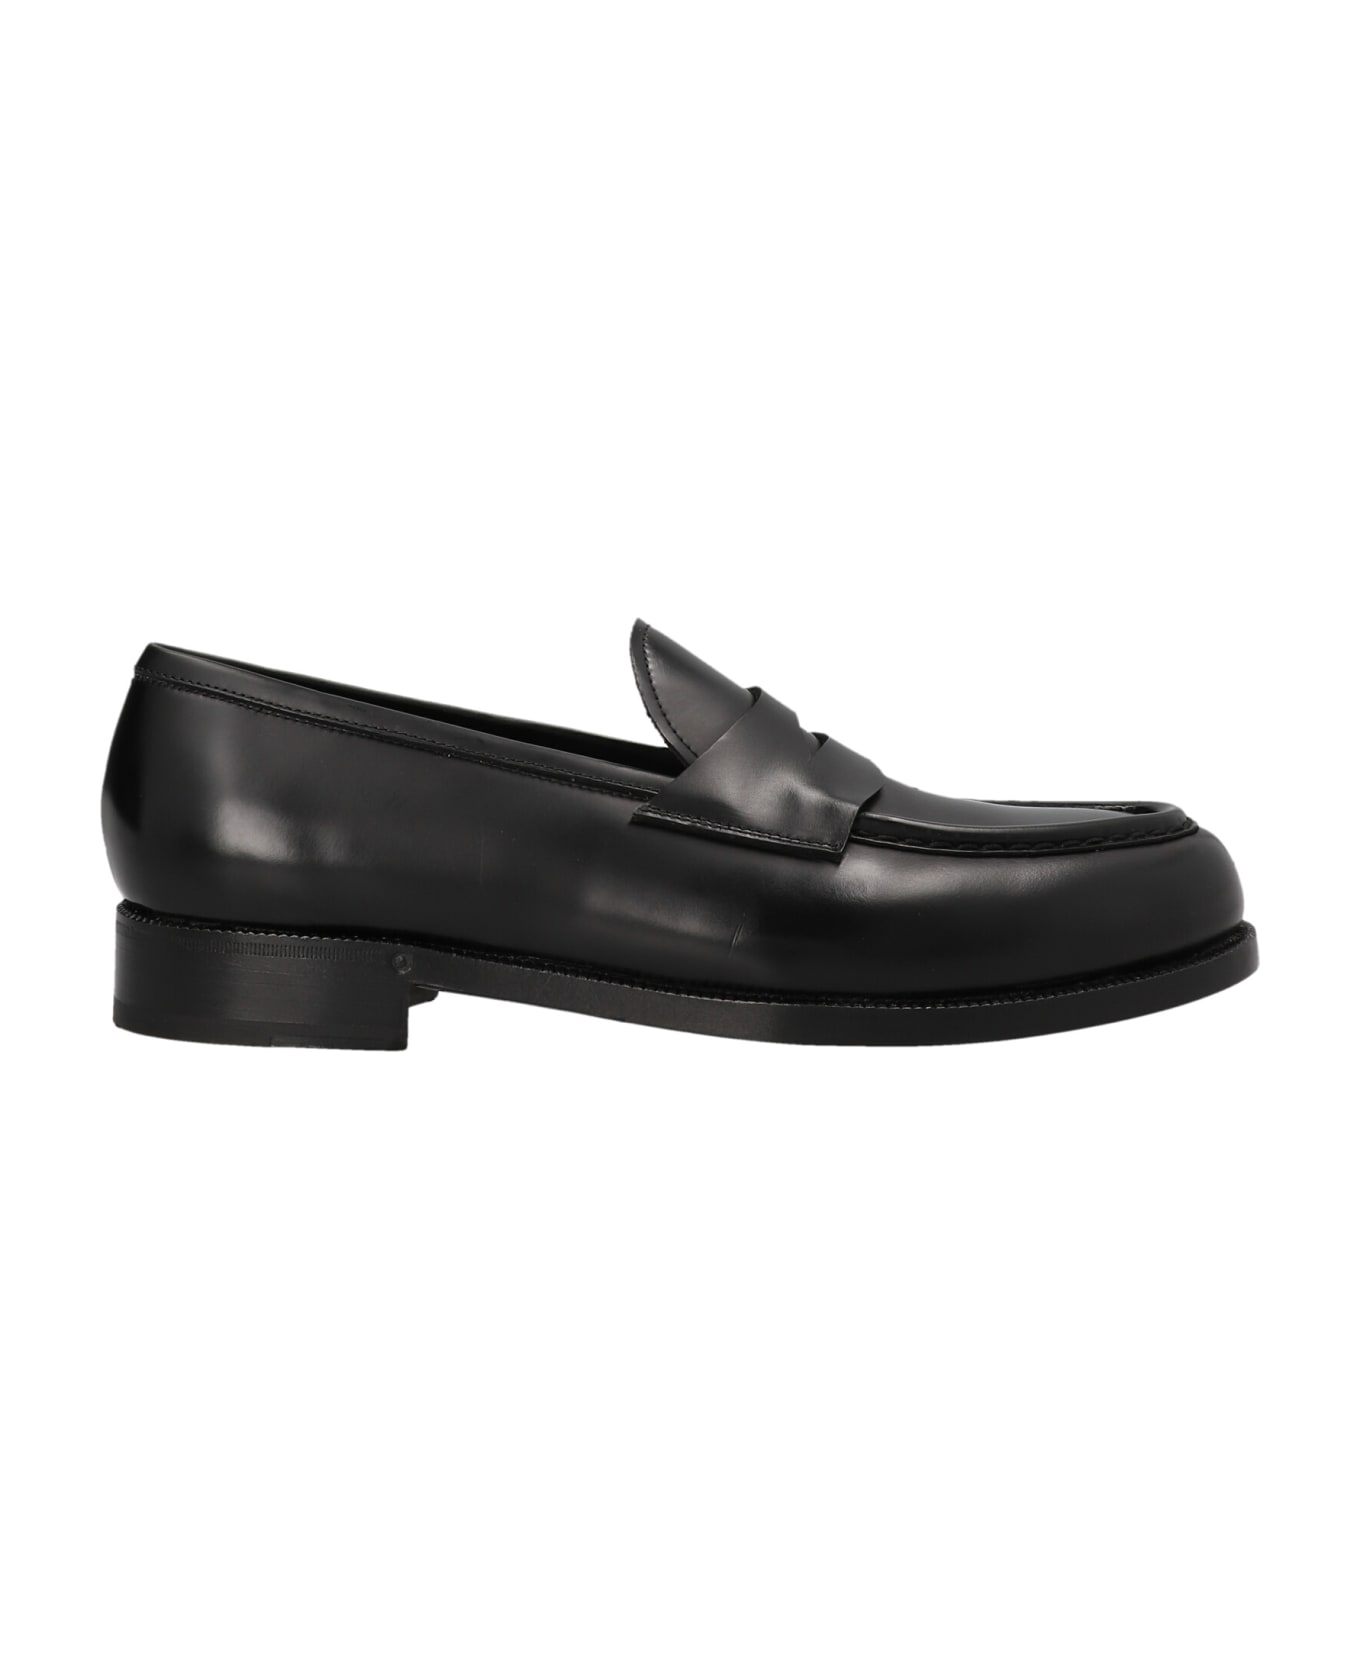 Lidfort Leather Loafers - Black   ローファー＆デッキシューズ